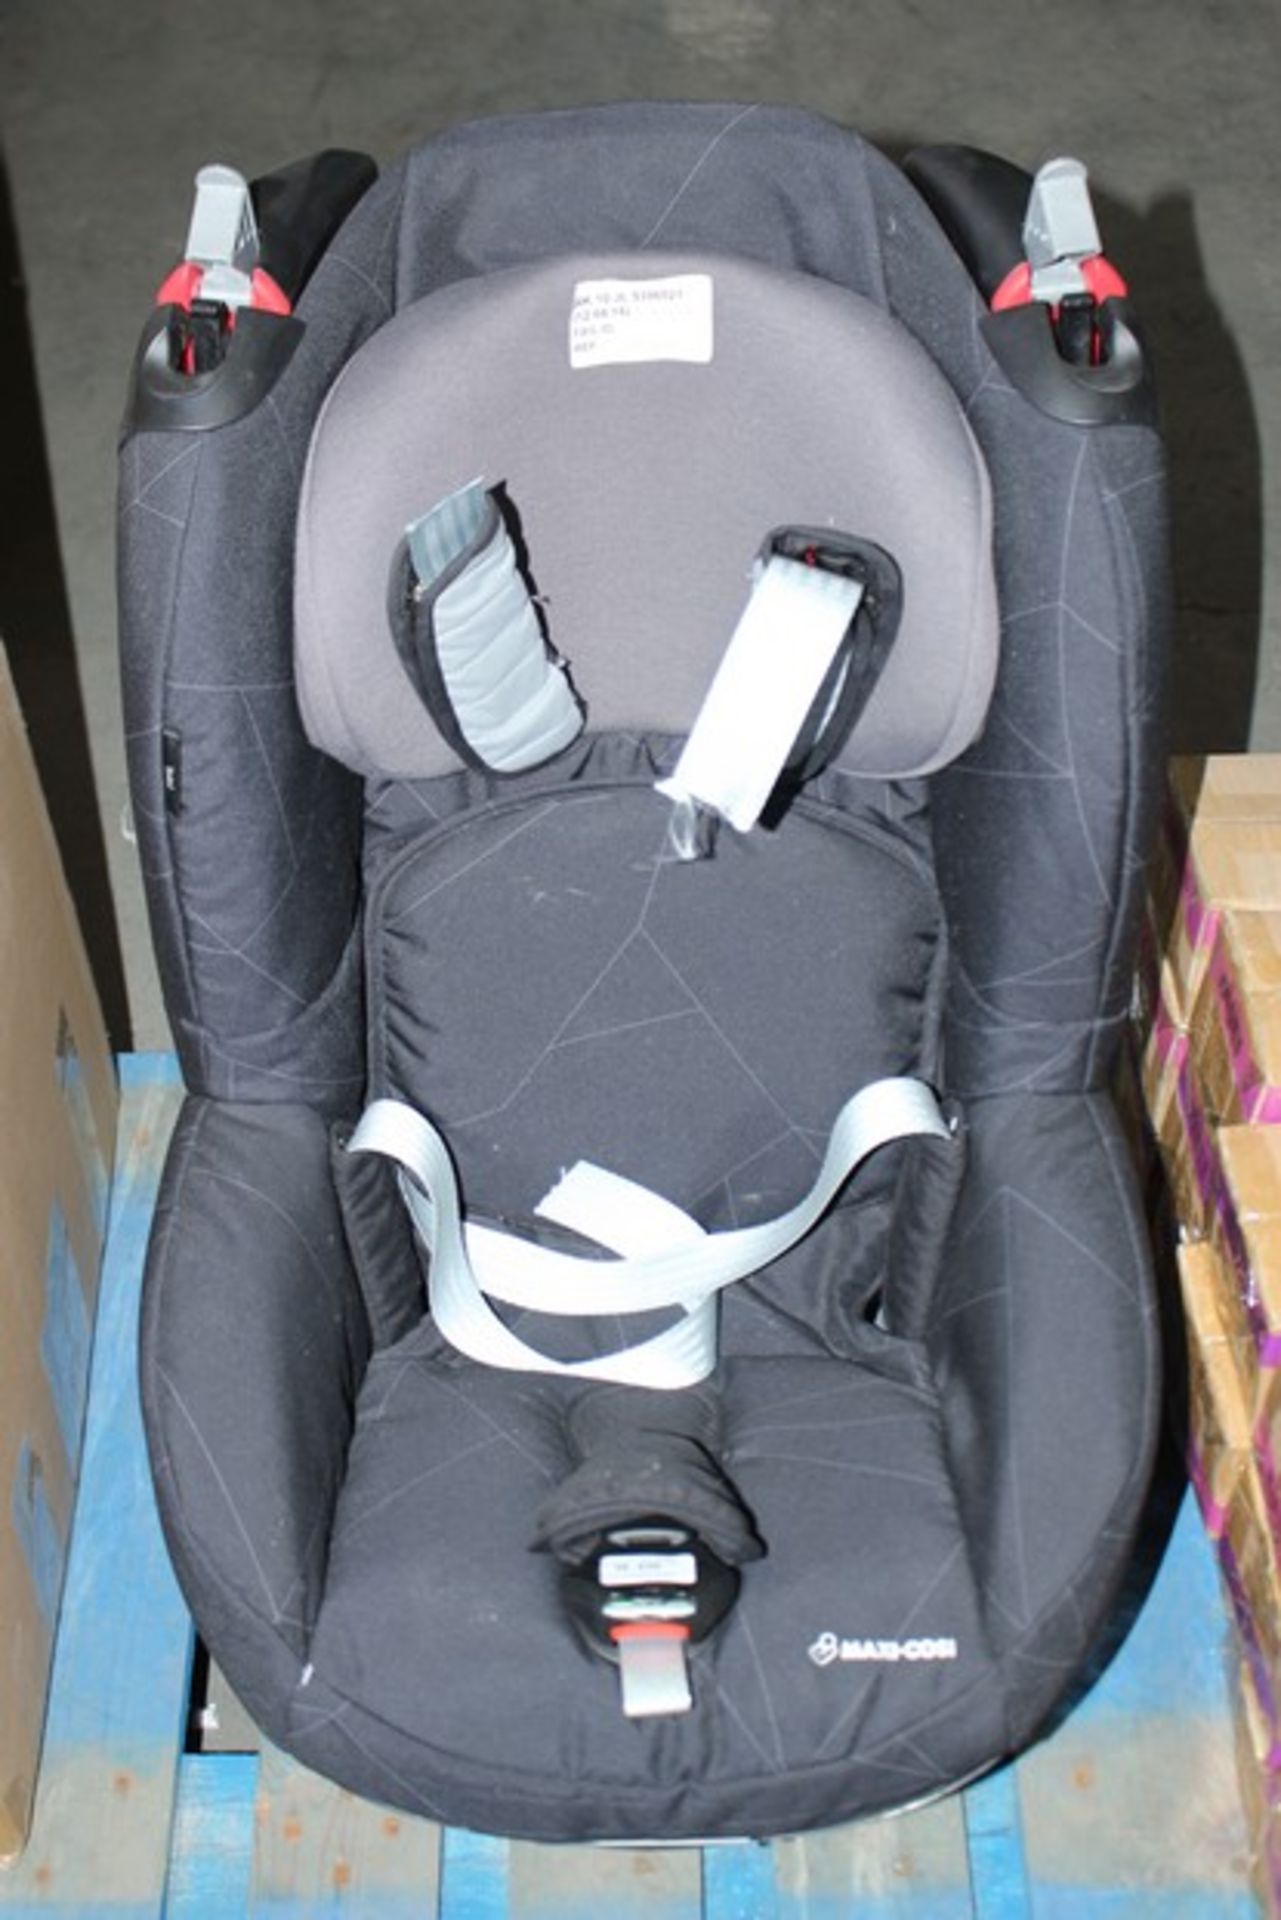 1X MAXI-COSI CHILDREN'S CAR SEAT (IN NEED OF ATTENTION) (12.04.18) (1114697)